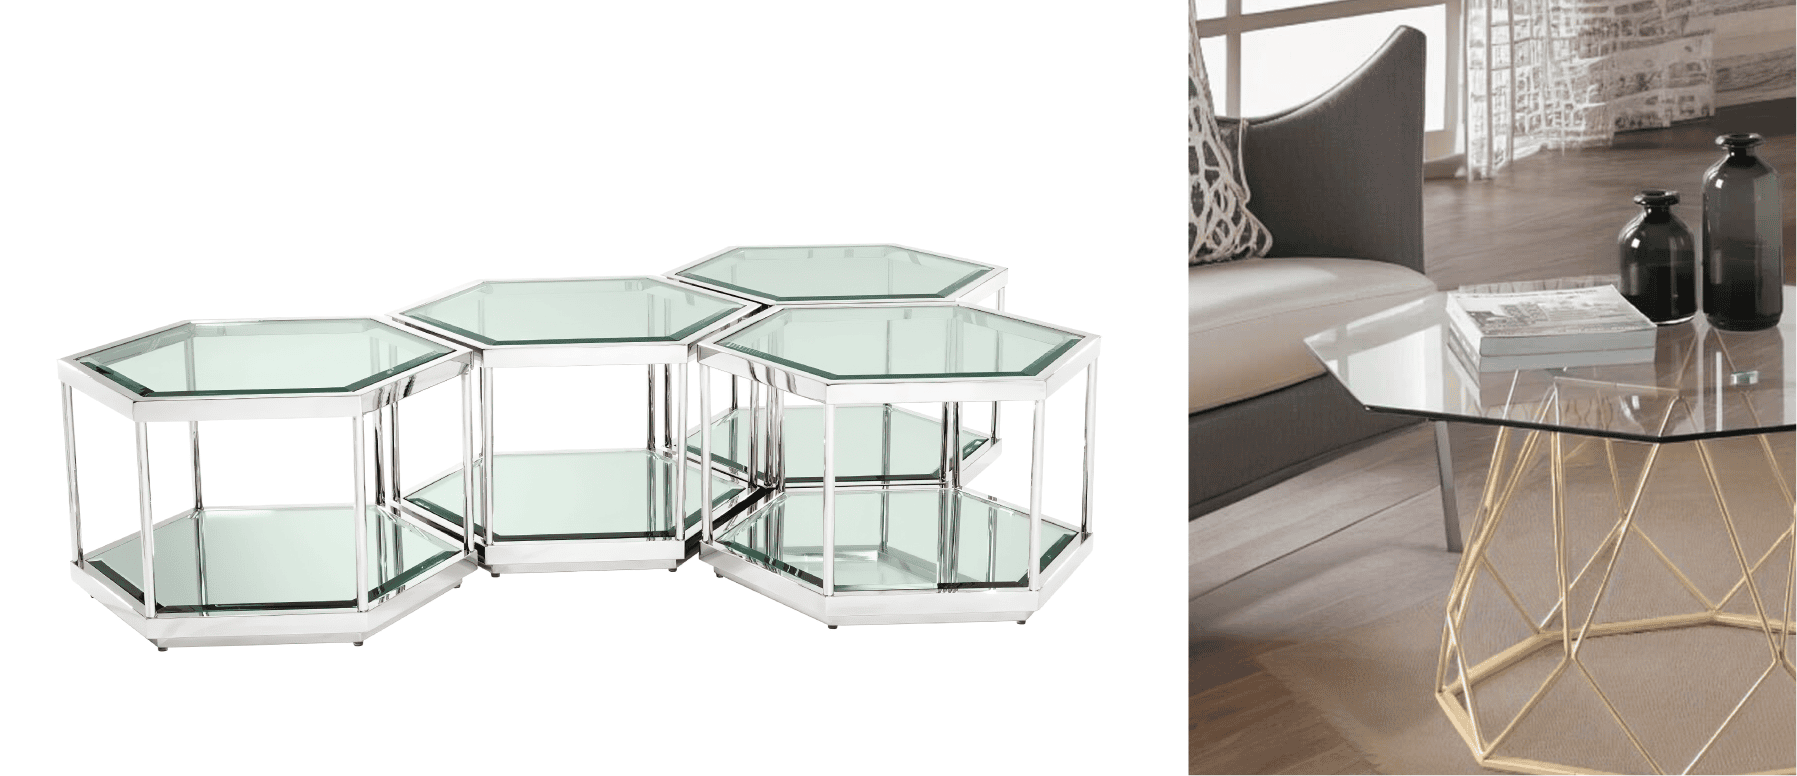 Two hexagonal tables with glass tabletops mounted on top 